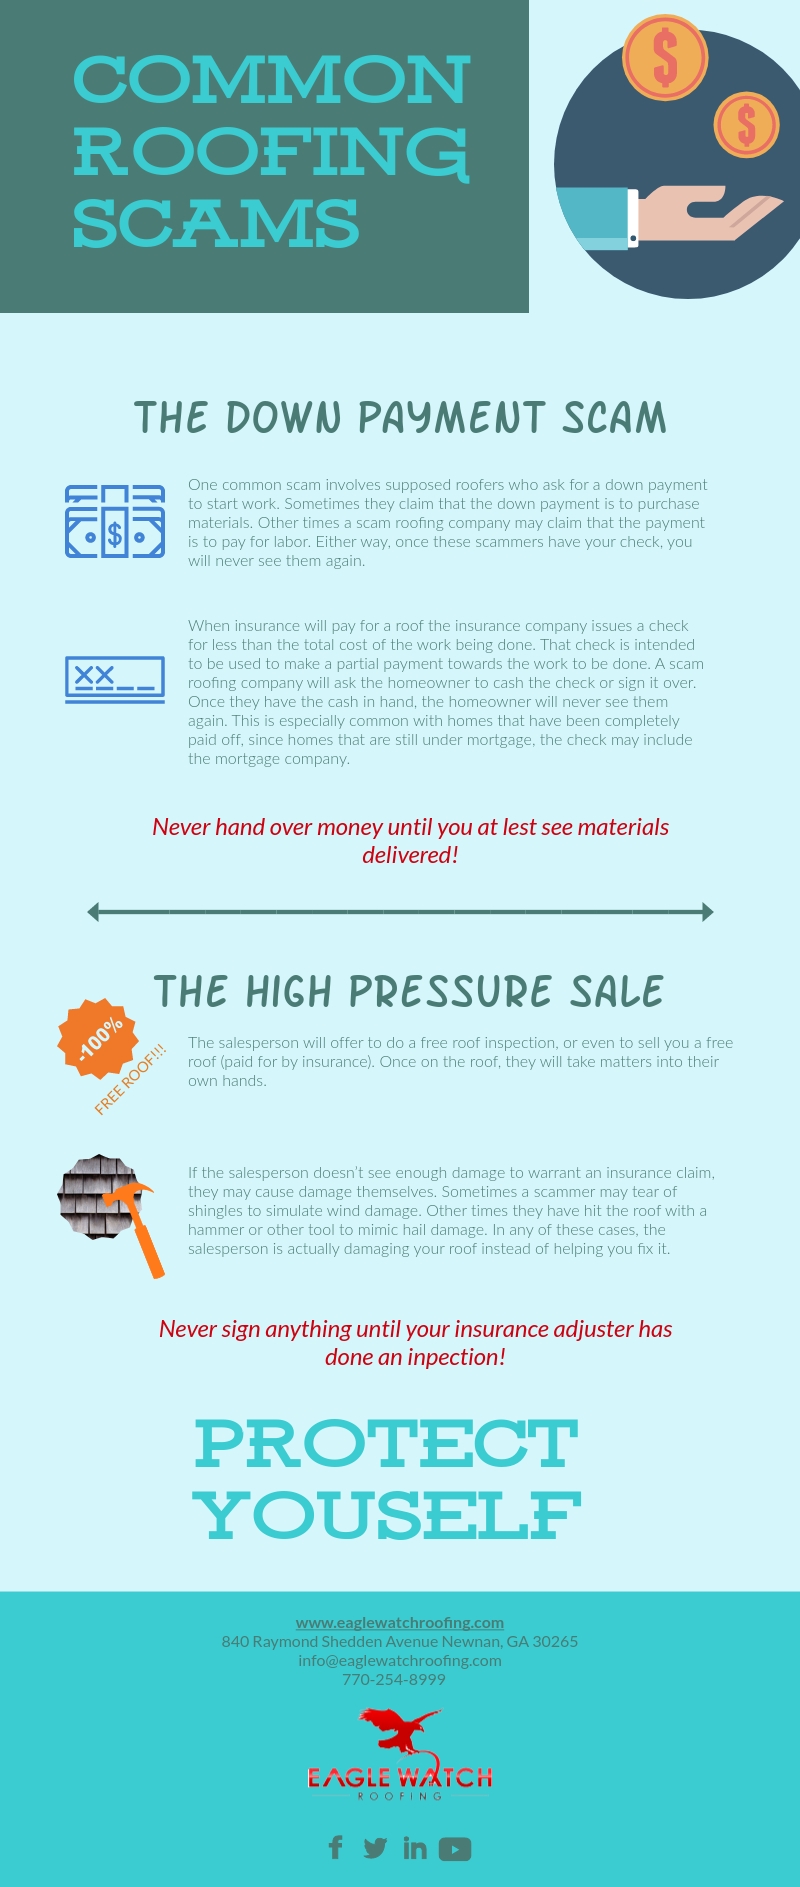 Avoid These Common Roofing Scams [infographic]